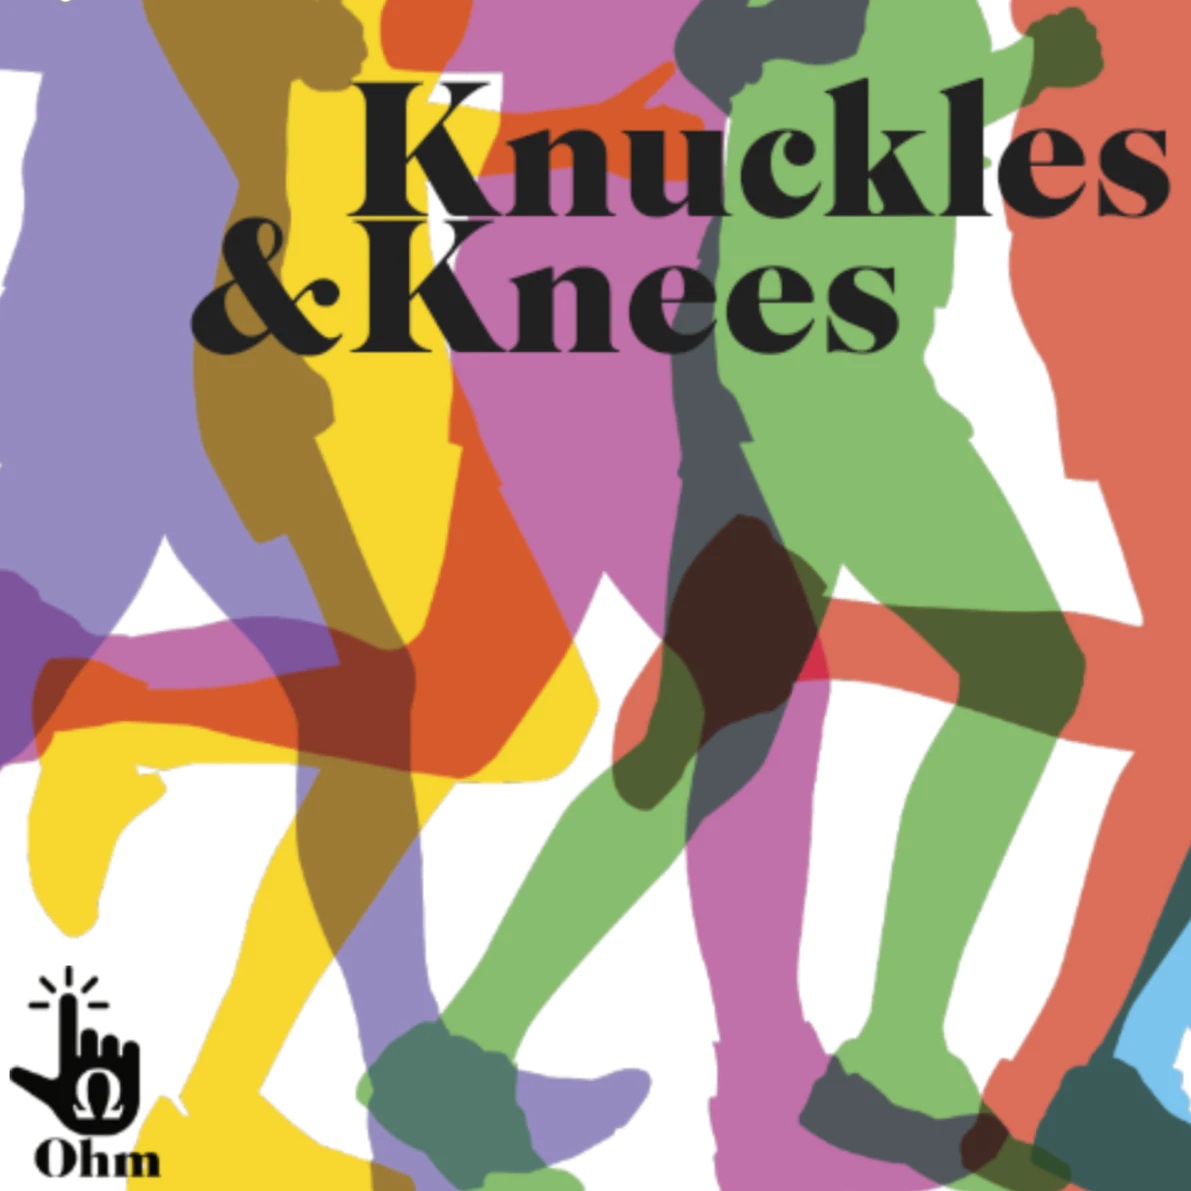 Knuckles & Knees Topical Minerals